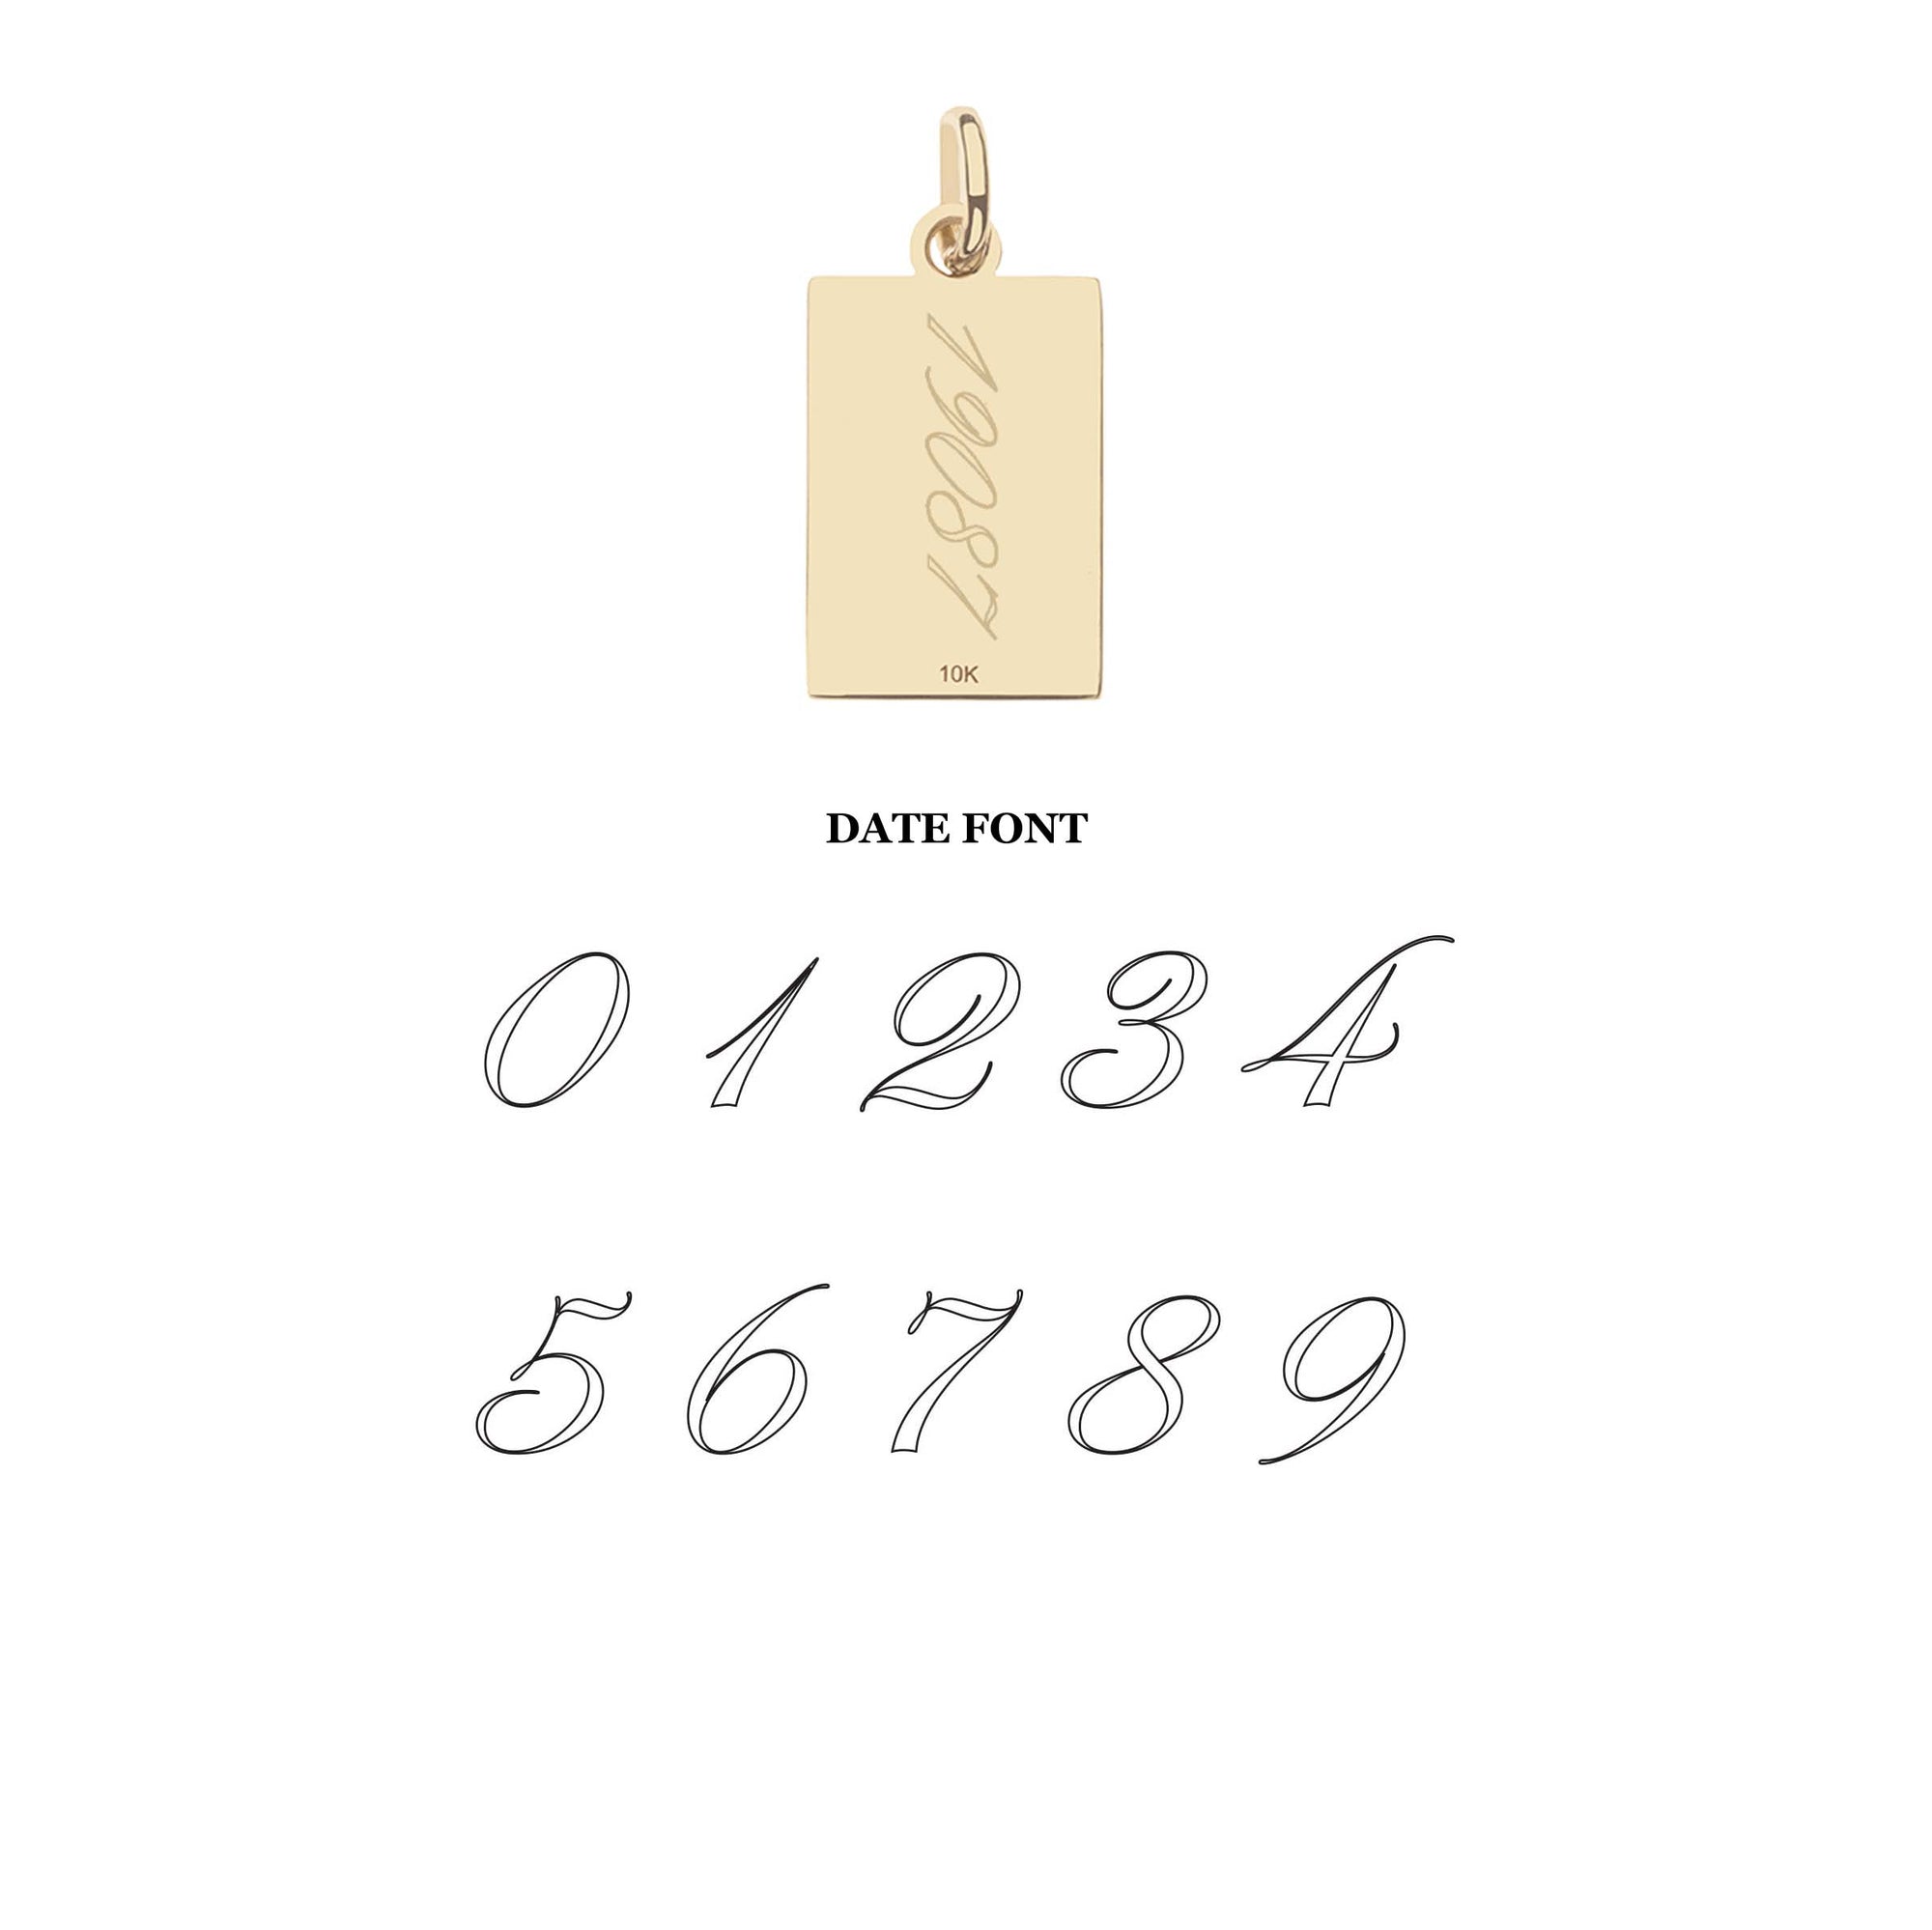 WANDERLUST Postcard Engravable Charm in Solid Gold